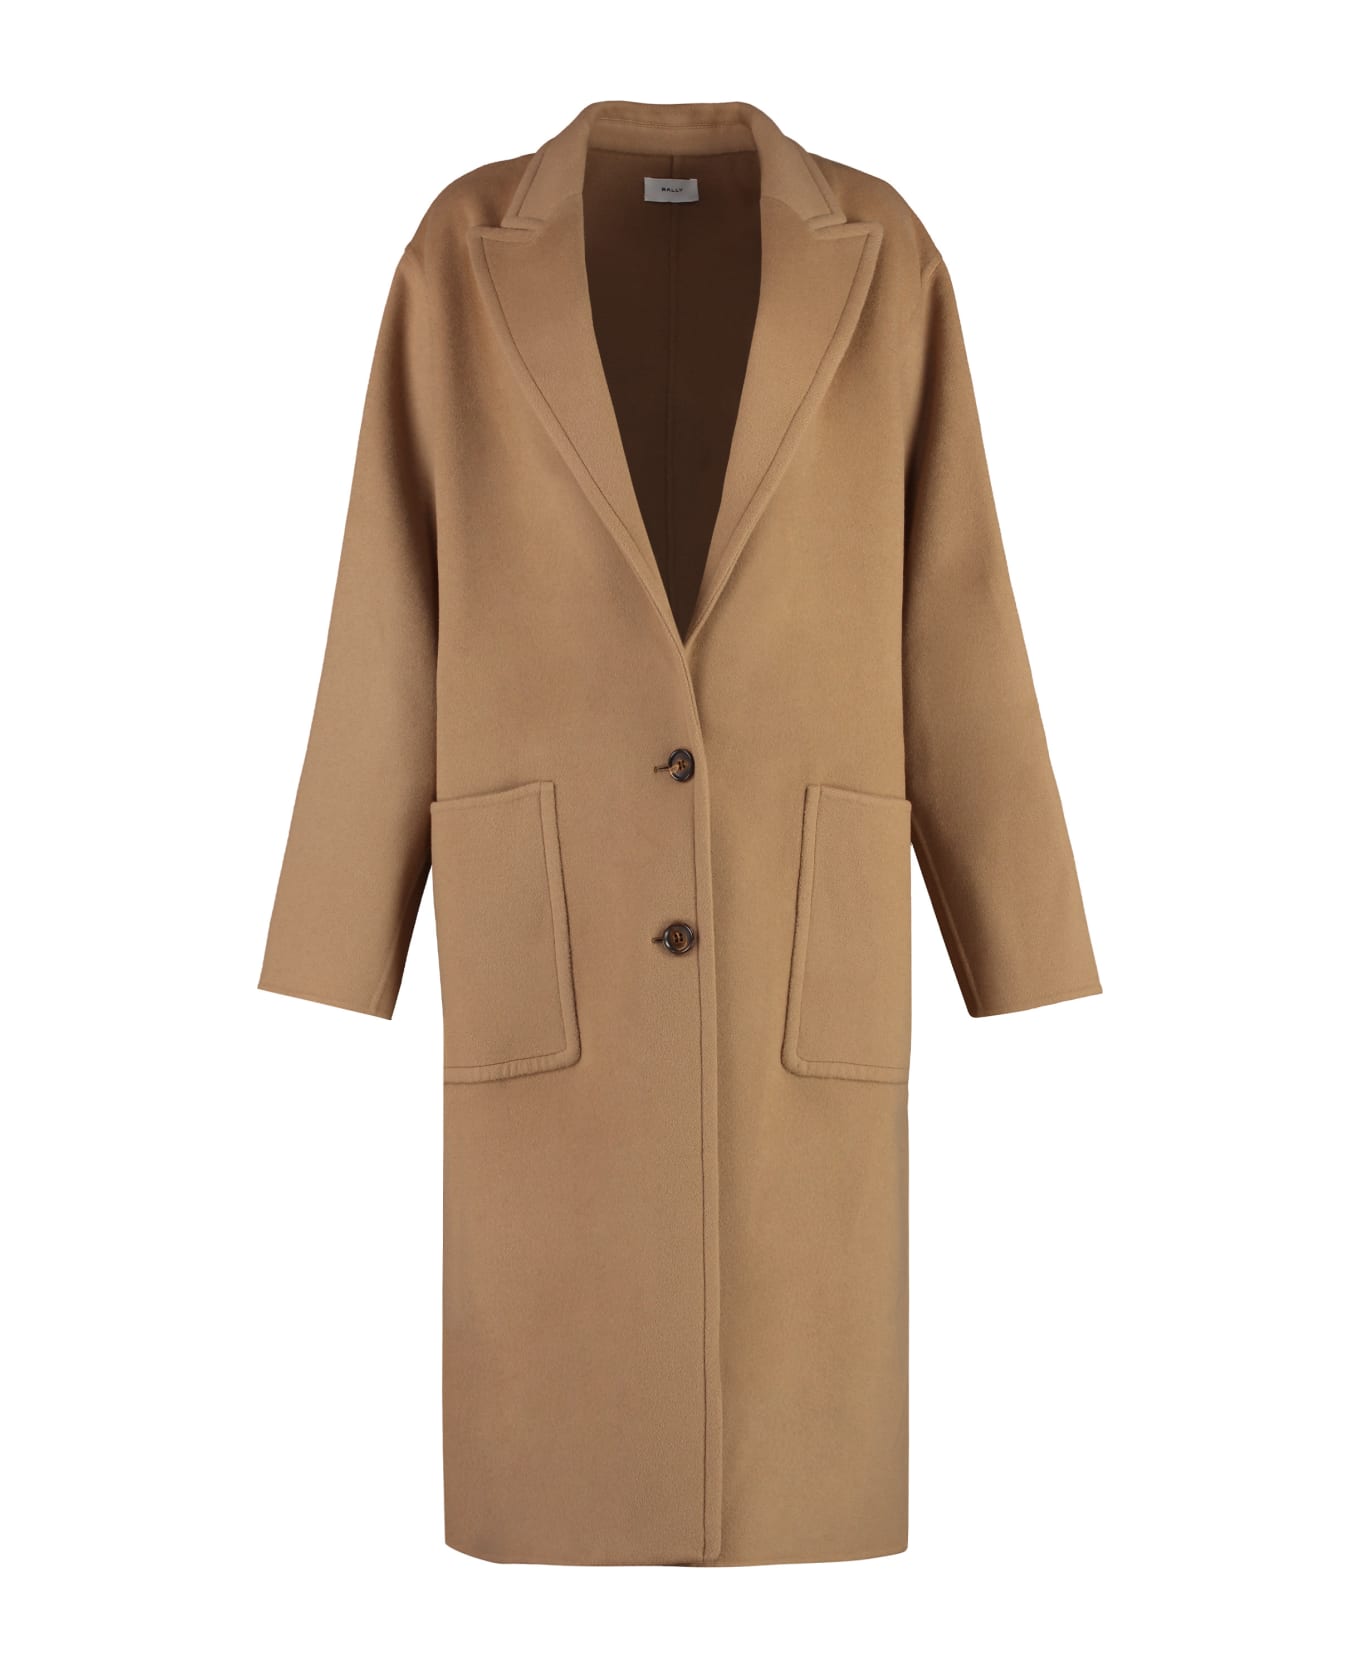 Bally Wool And Cashmere Coat - Camel